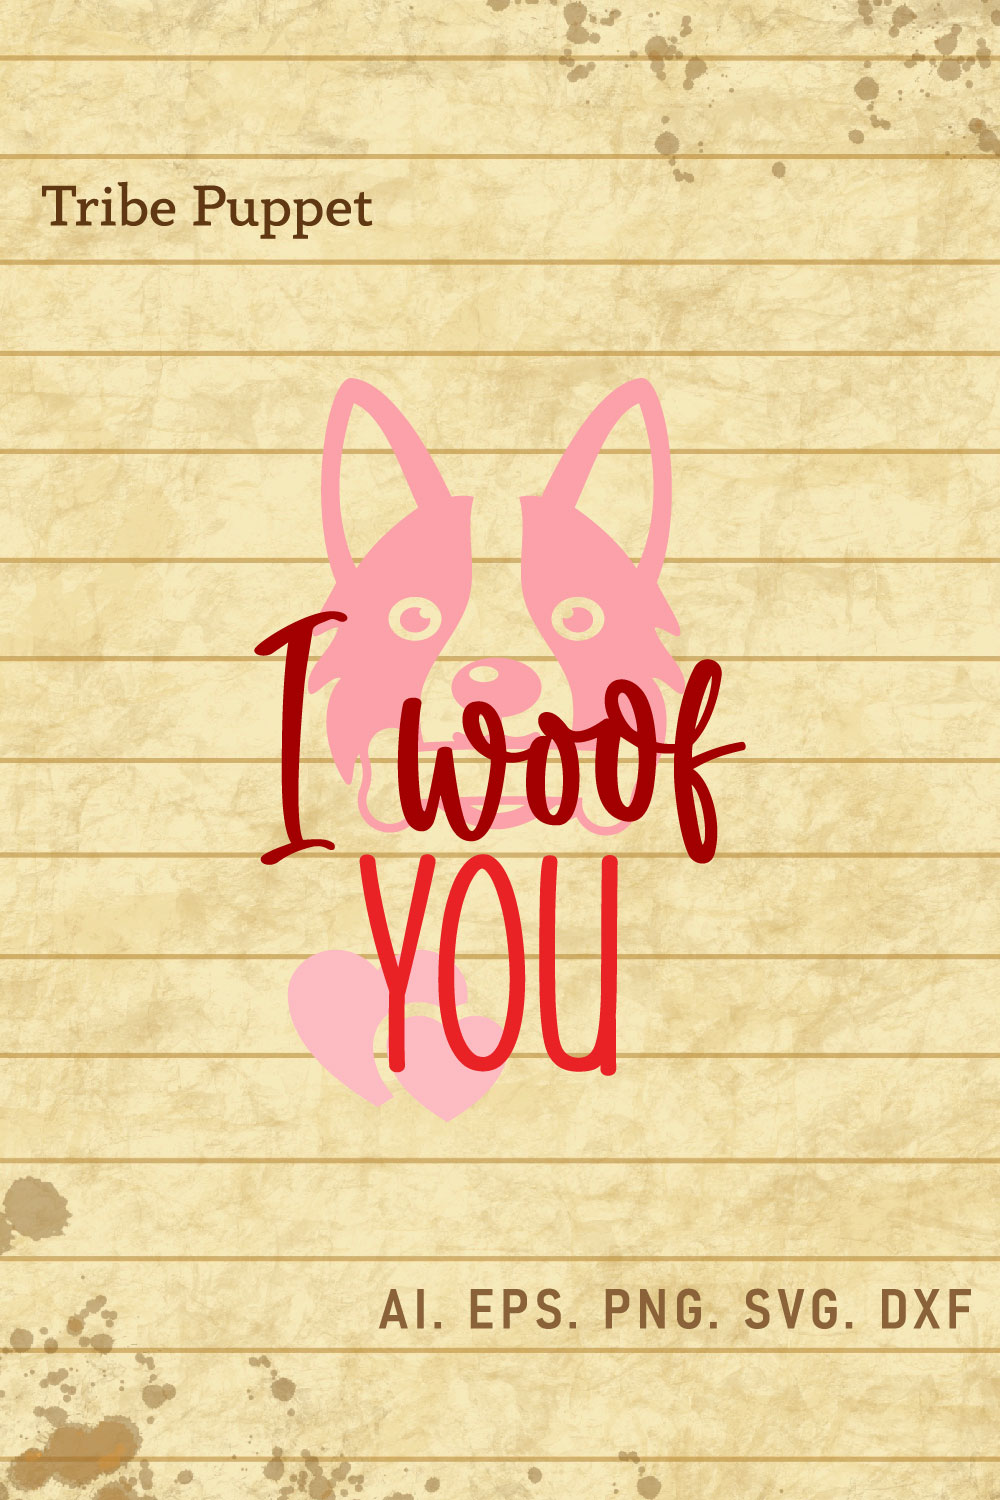 Dog valentines day quotes pinterest preview image.